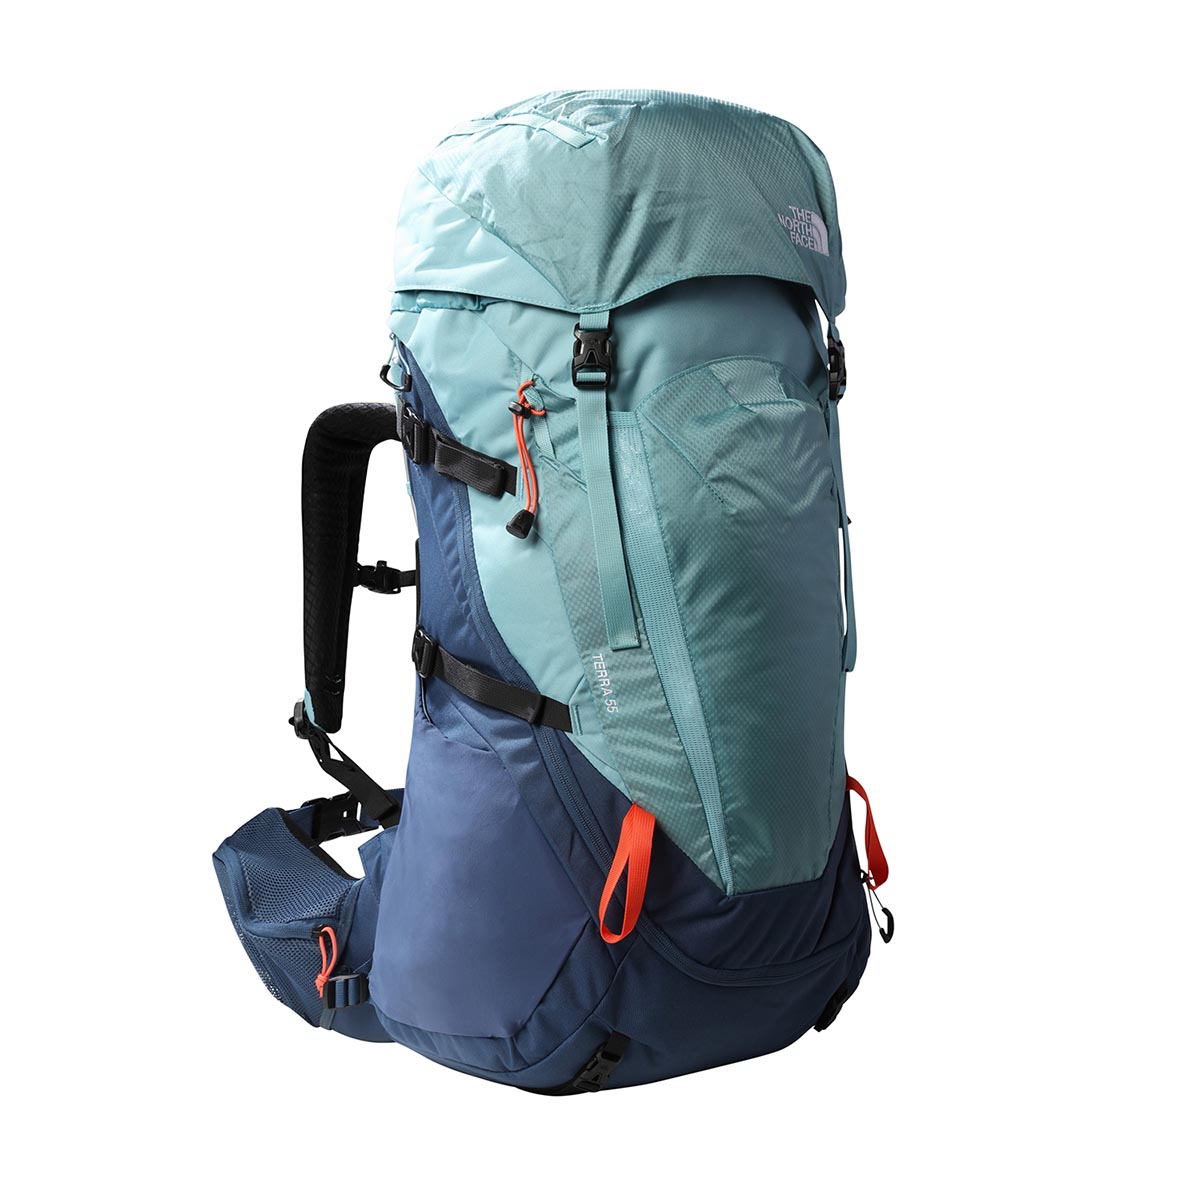 THE NORTH FACE - TERRA 55